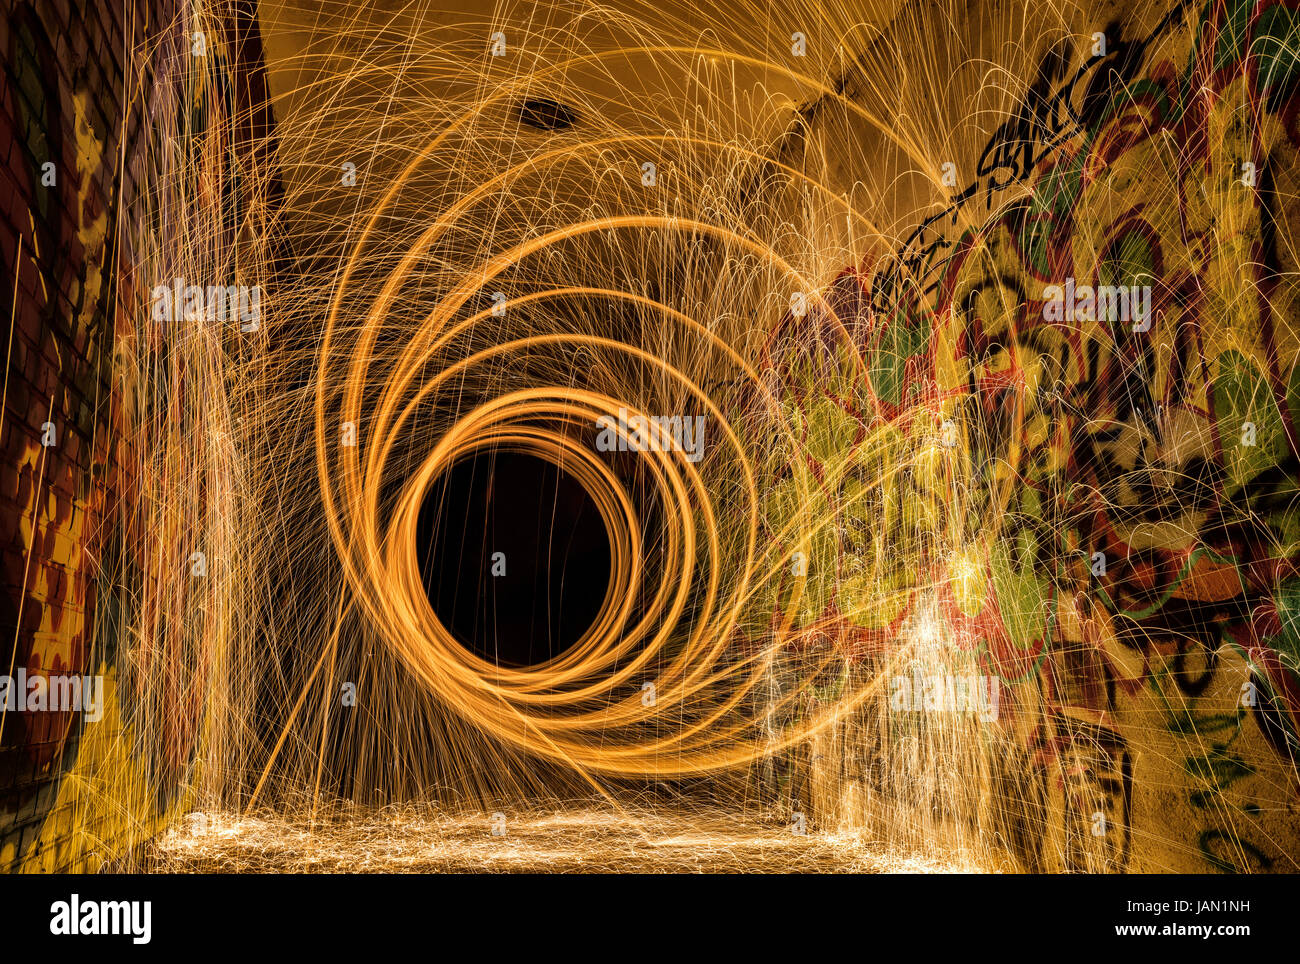 Steel wool vortex spiral light painting in the tunnel Stock Photo